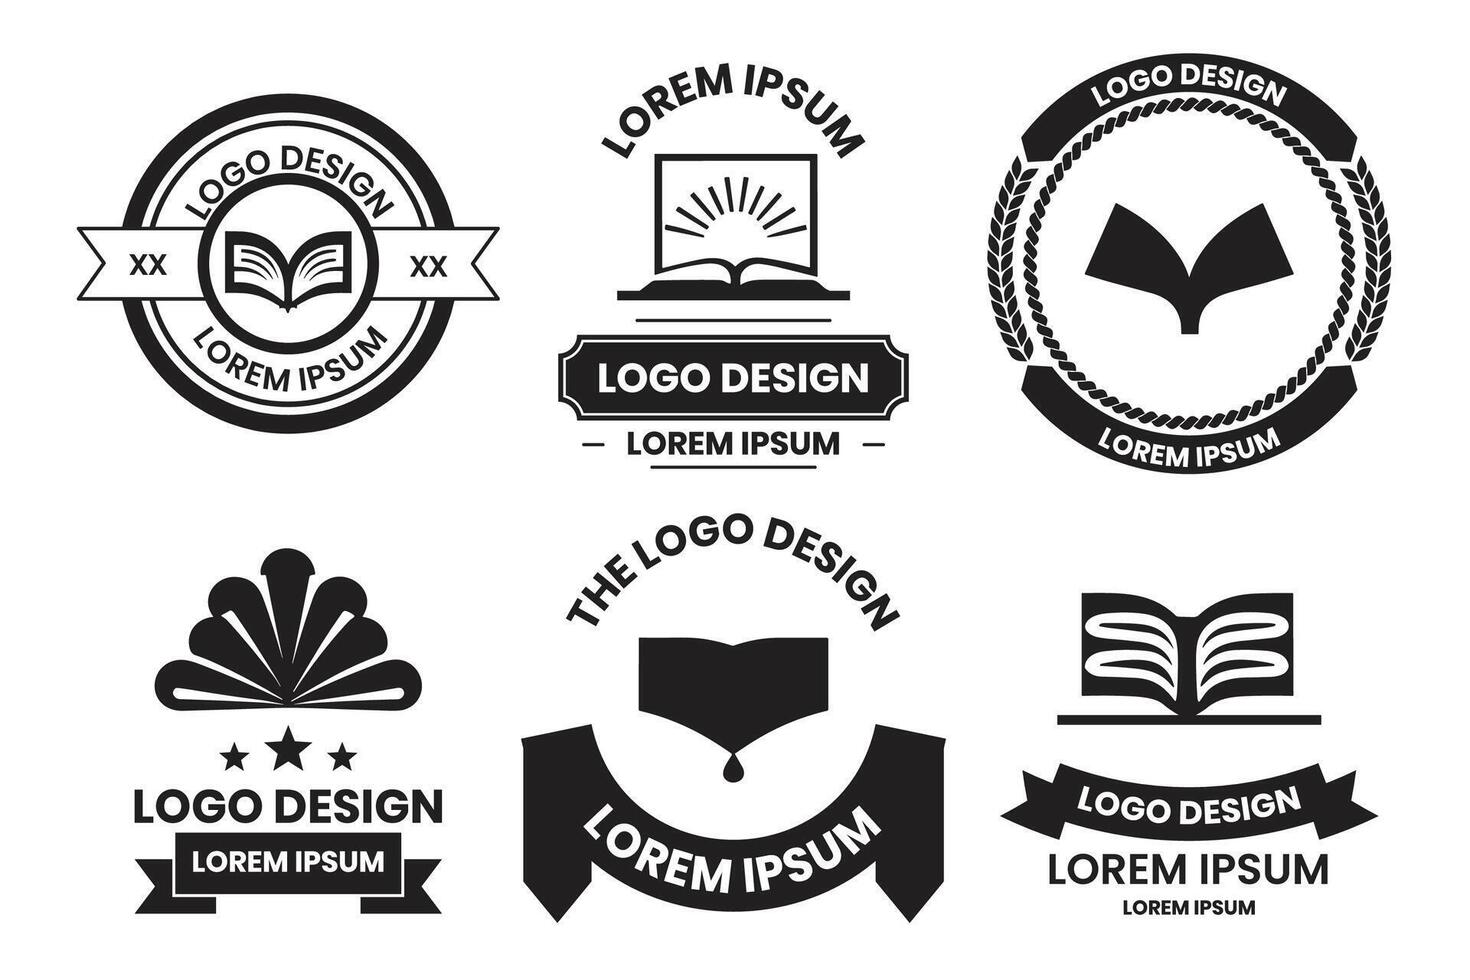 Bookstore or eyeglasses shop logo or badge in bookstore concept in Vintage or retro style vector